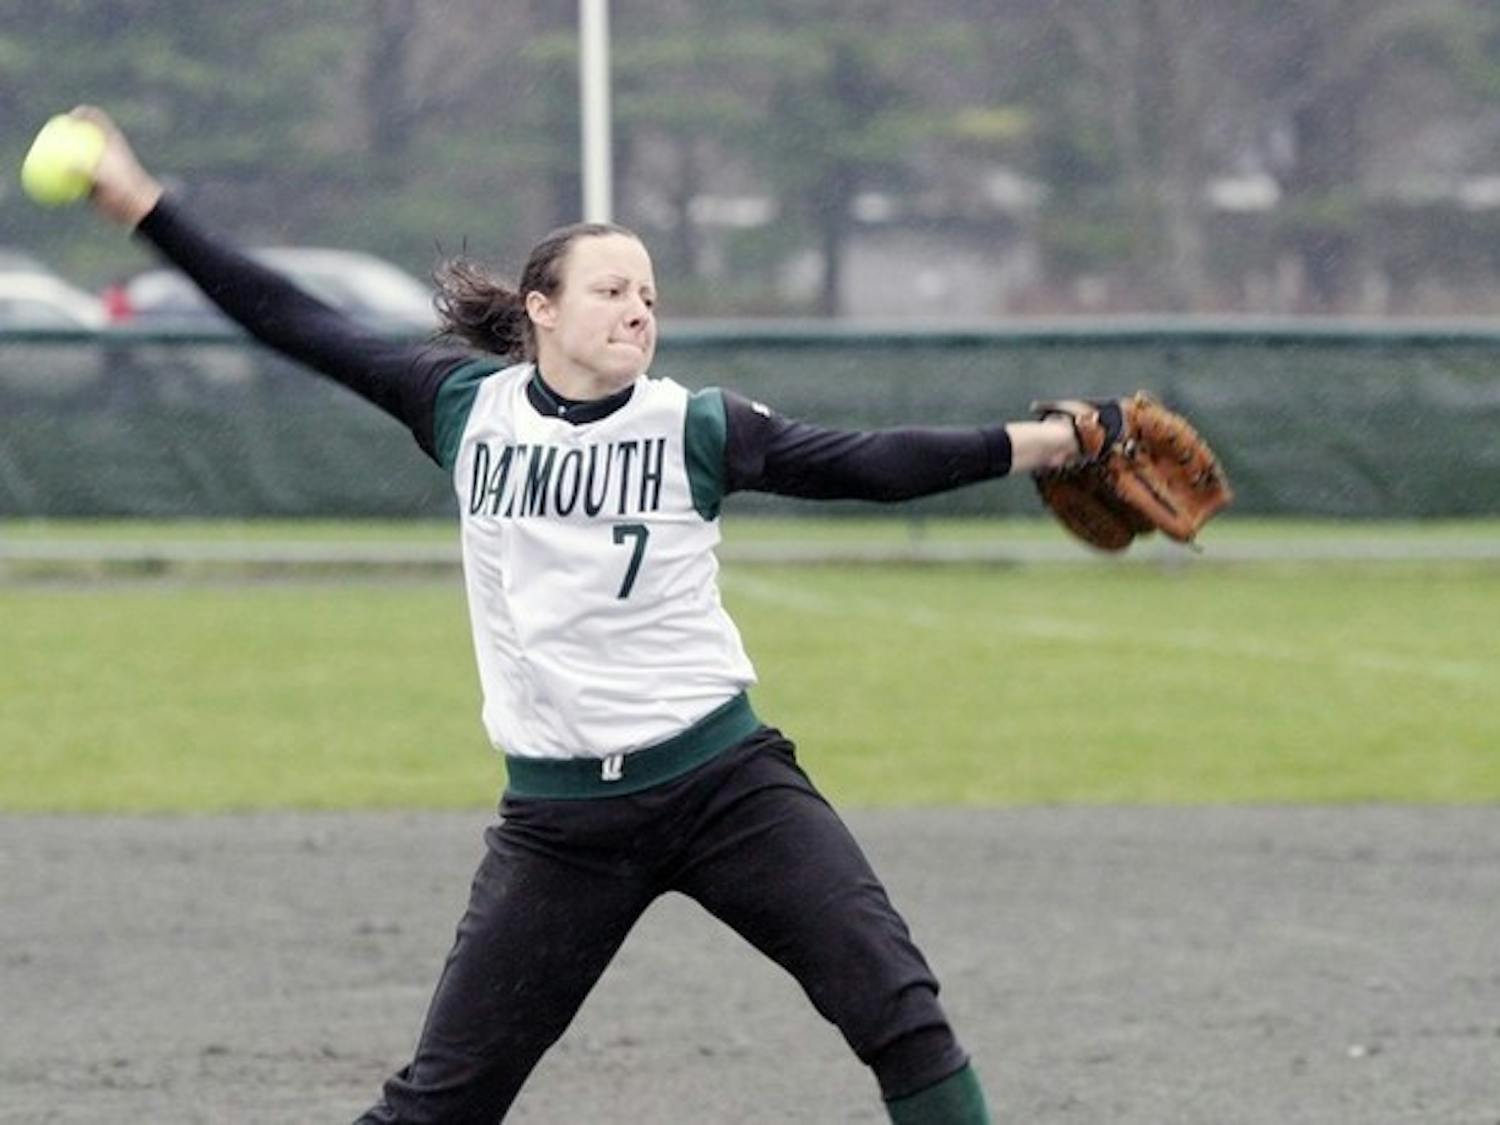 Strong pitching performances helped the Big Green improve upon its recent struggles in a 2-2 weekend.